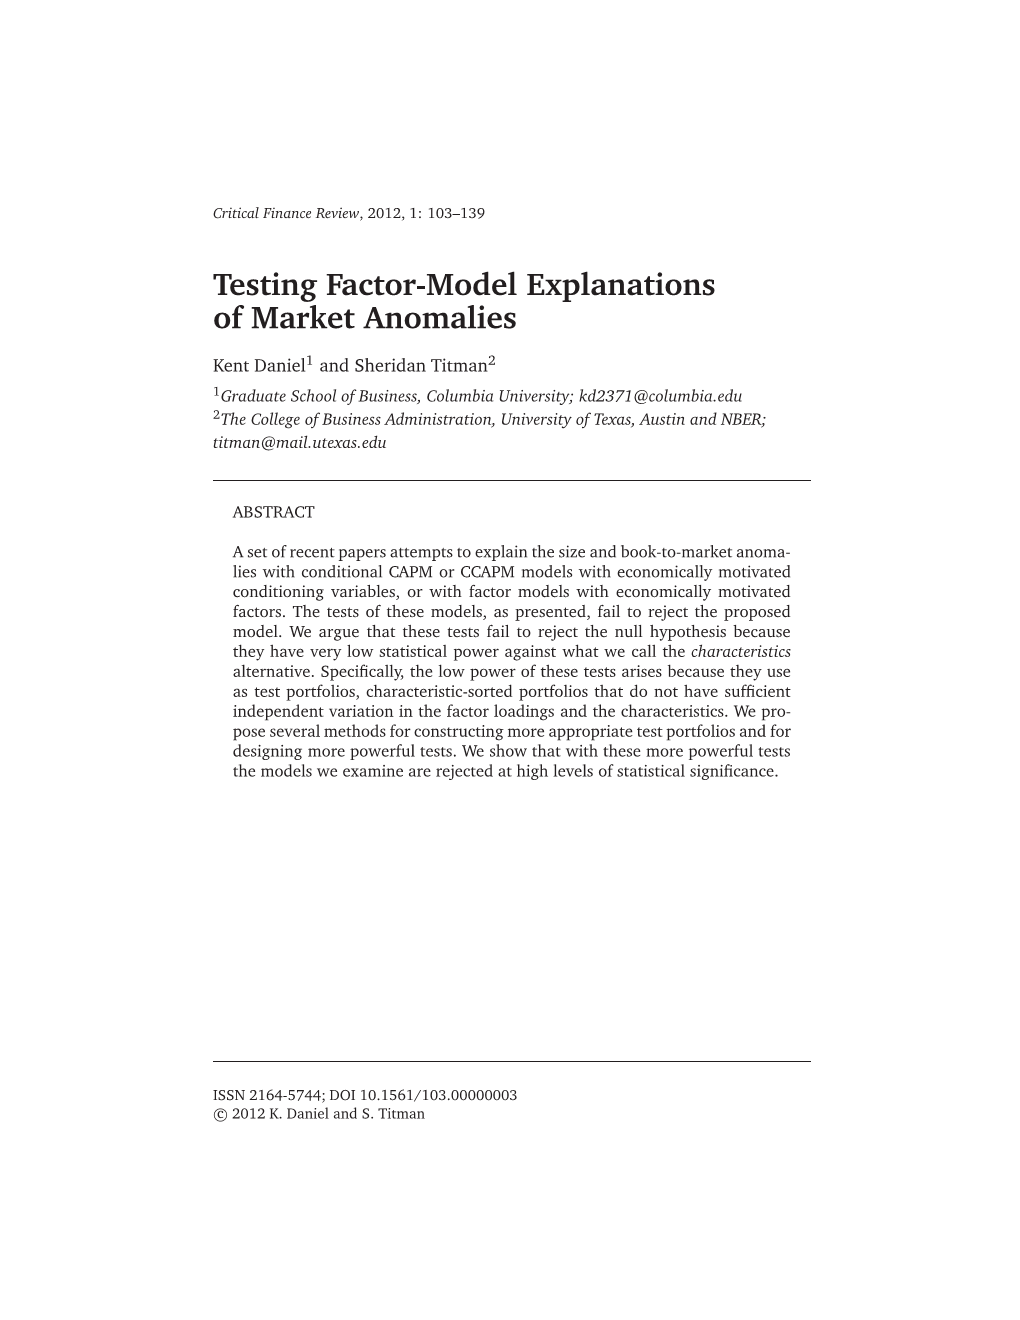 Testing Factor-Model Explanations of Market Anomalies